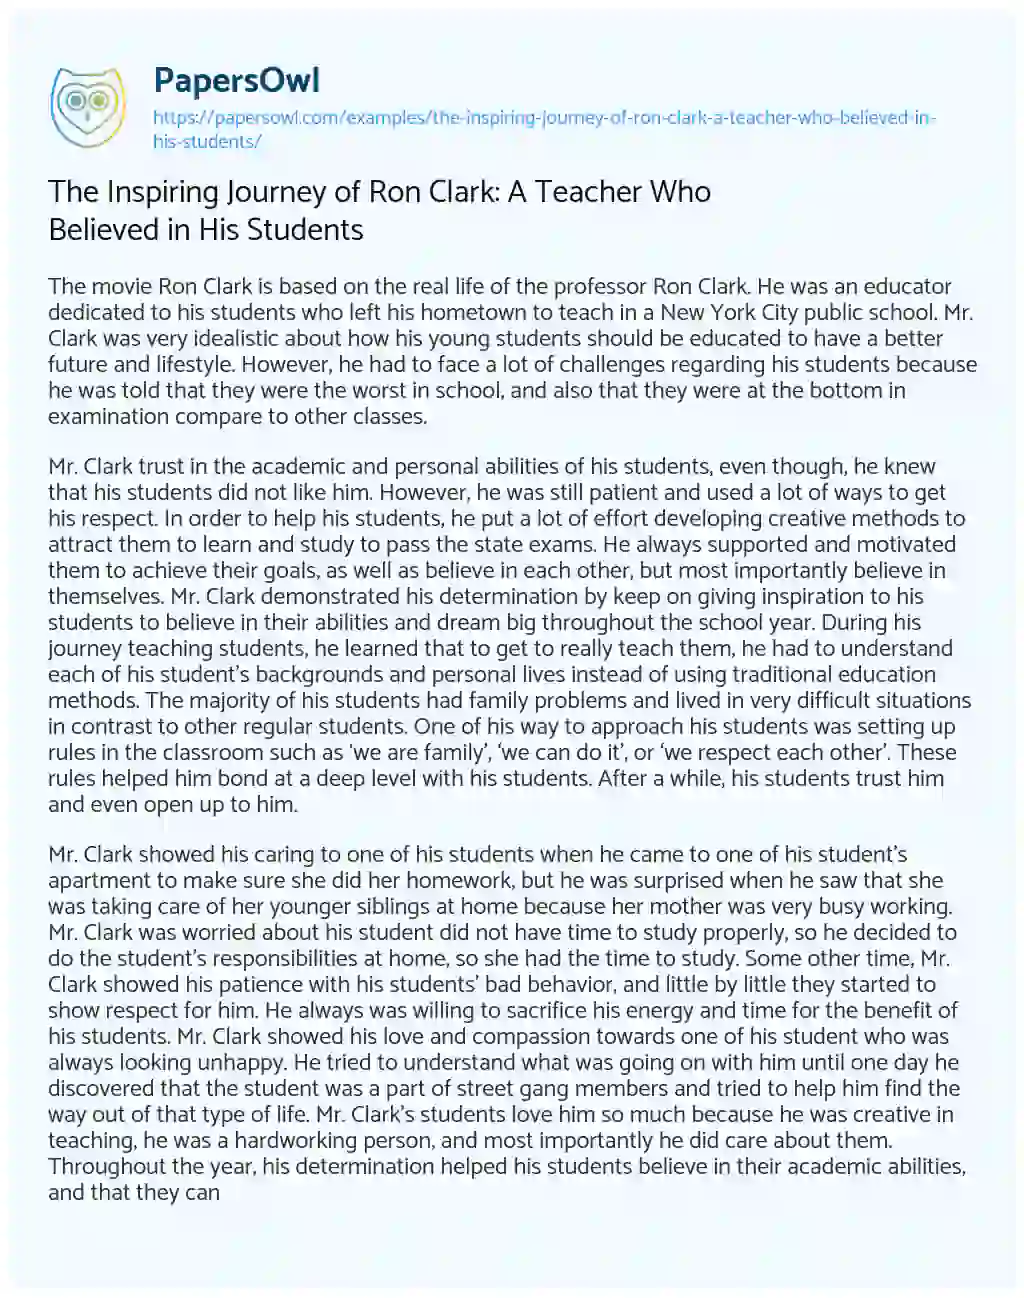 Essay on The Inspiring Journey of Ron Clark: a Teacher who Believed in his Students